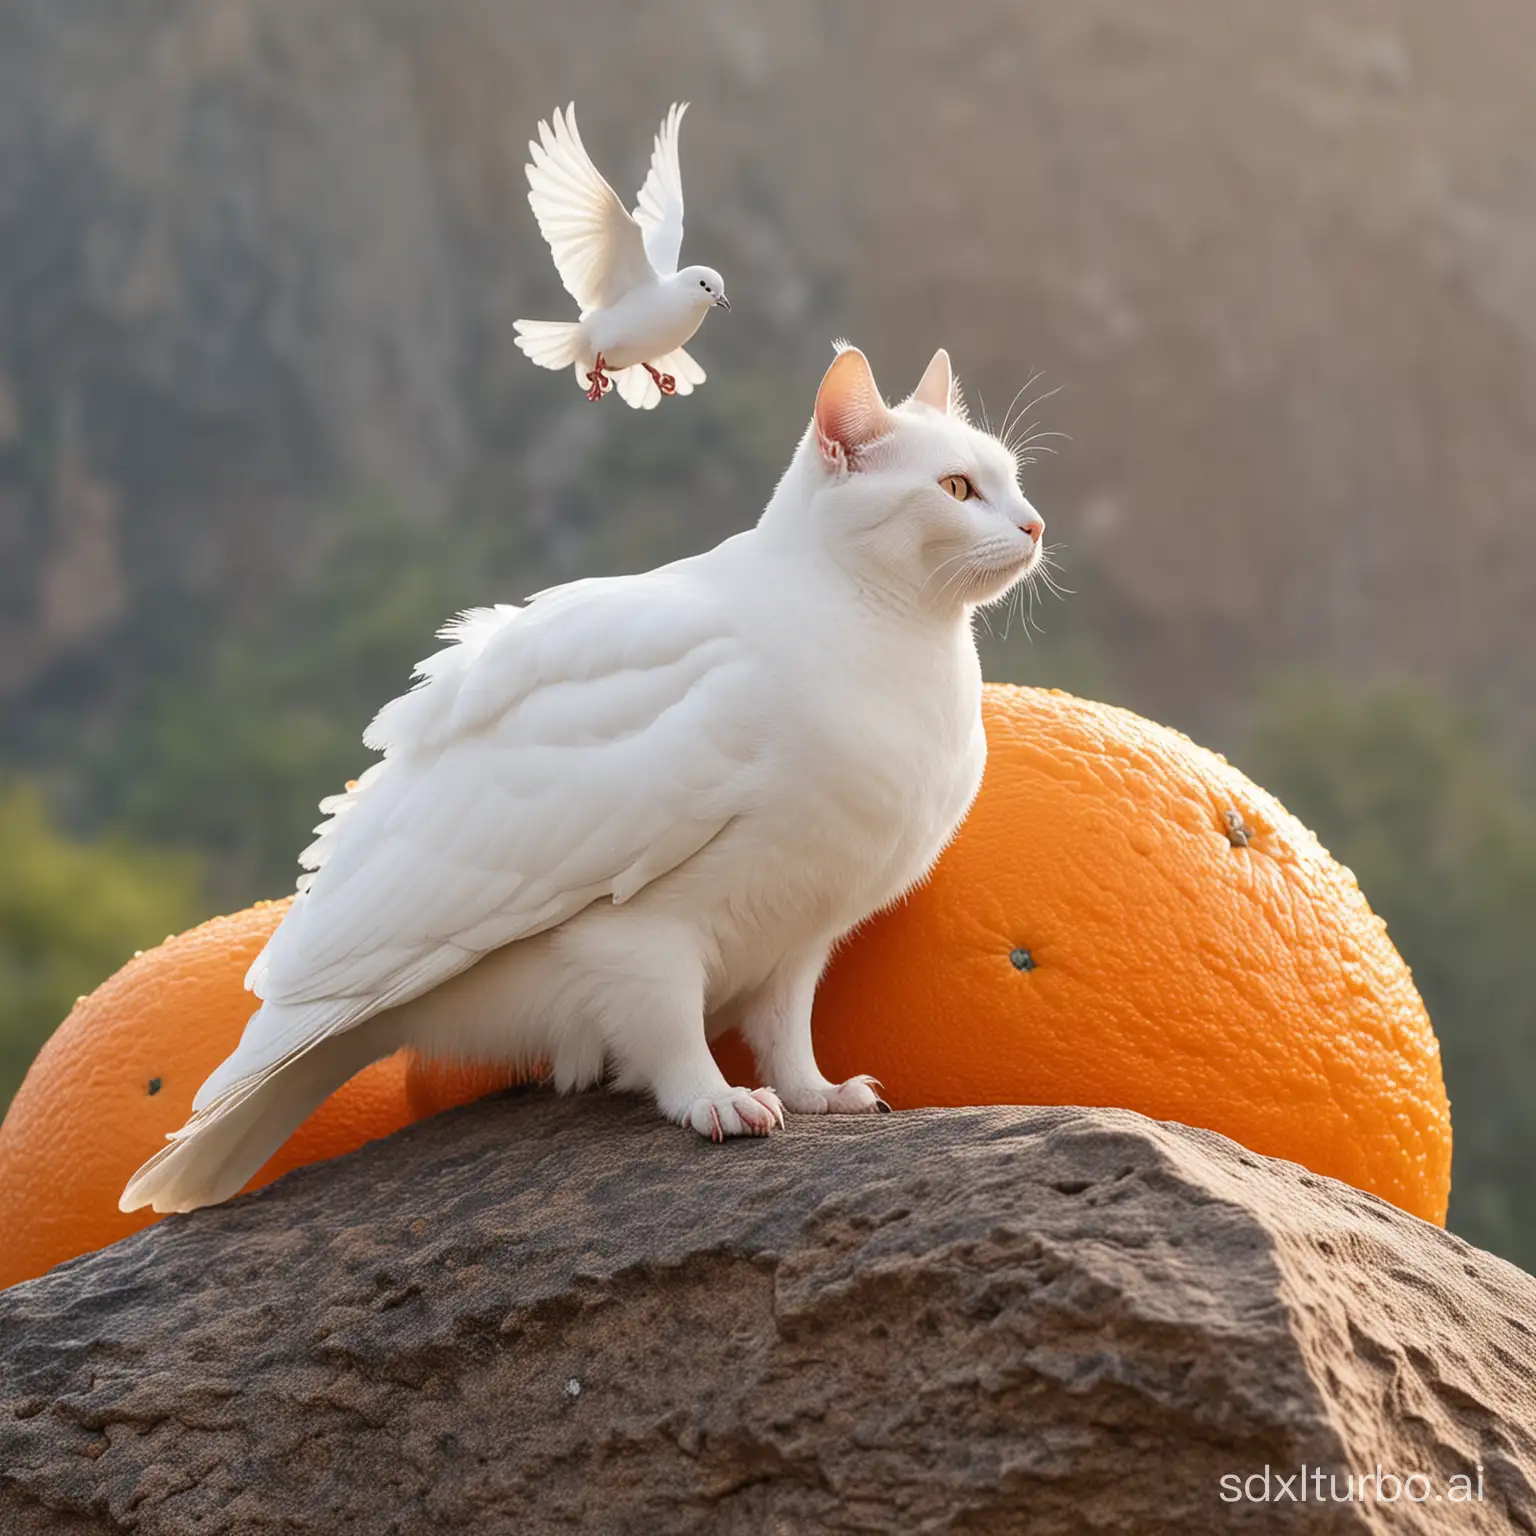 Peaceful-White-Dove-Perched-on-Orange-Cat-on-Rocky-Outcrop